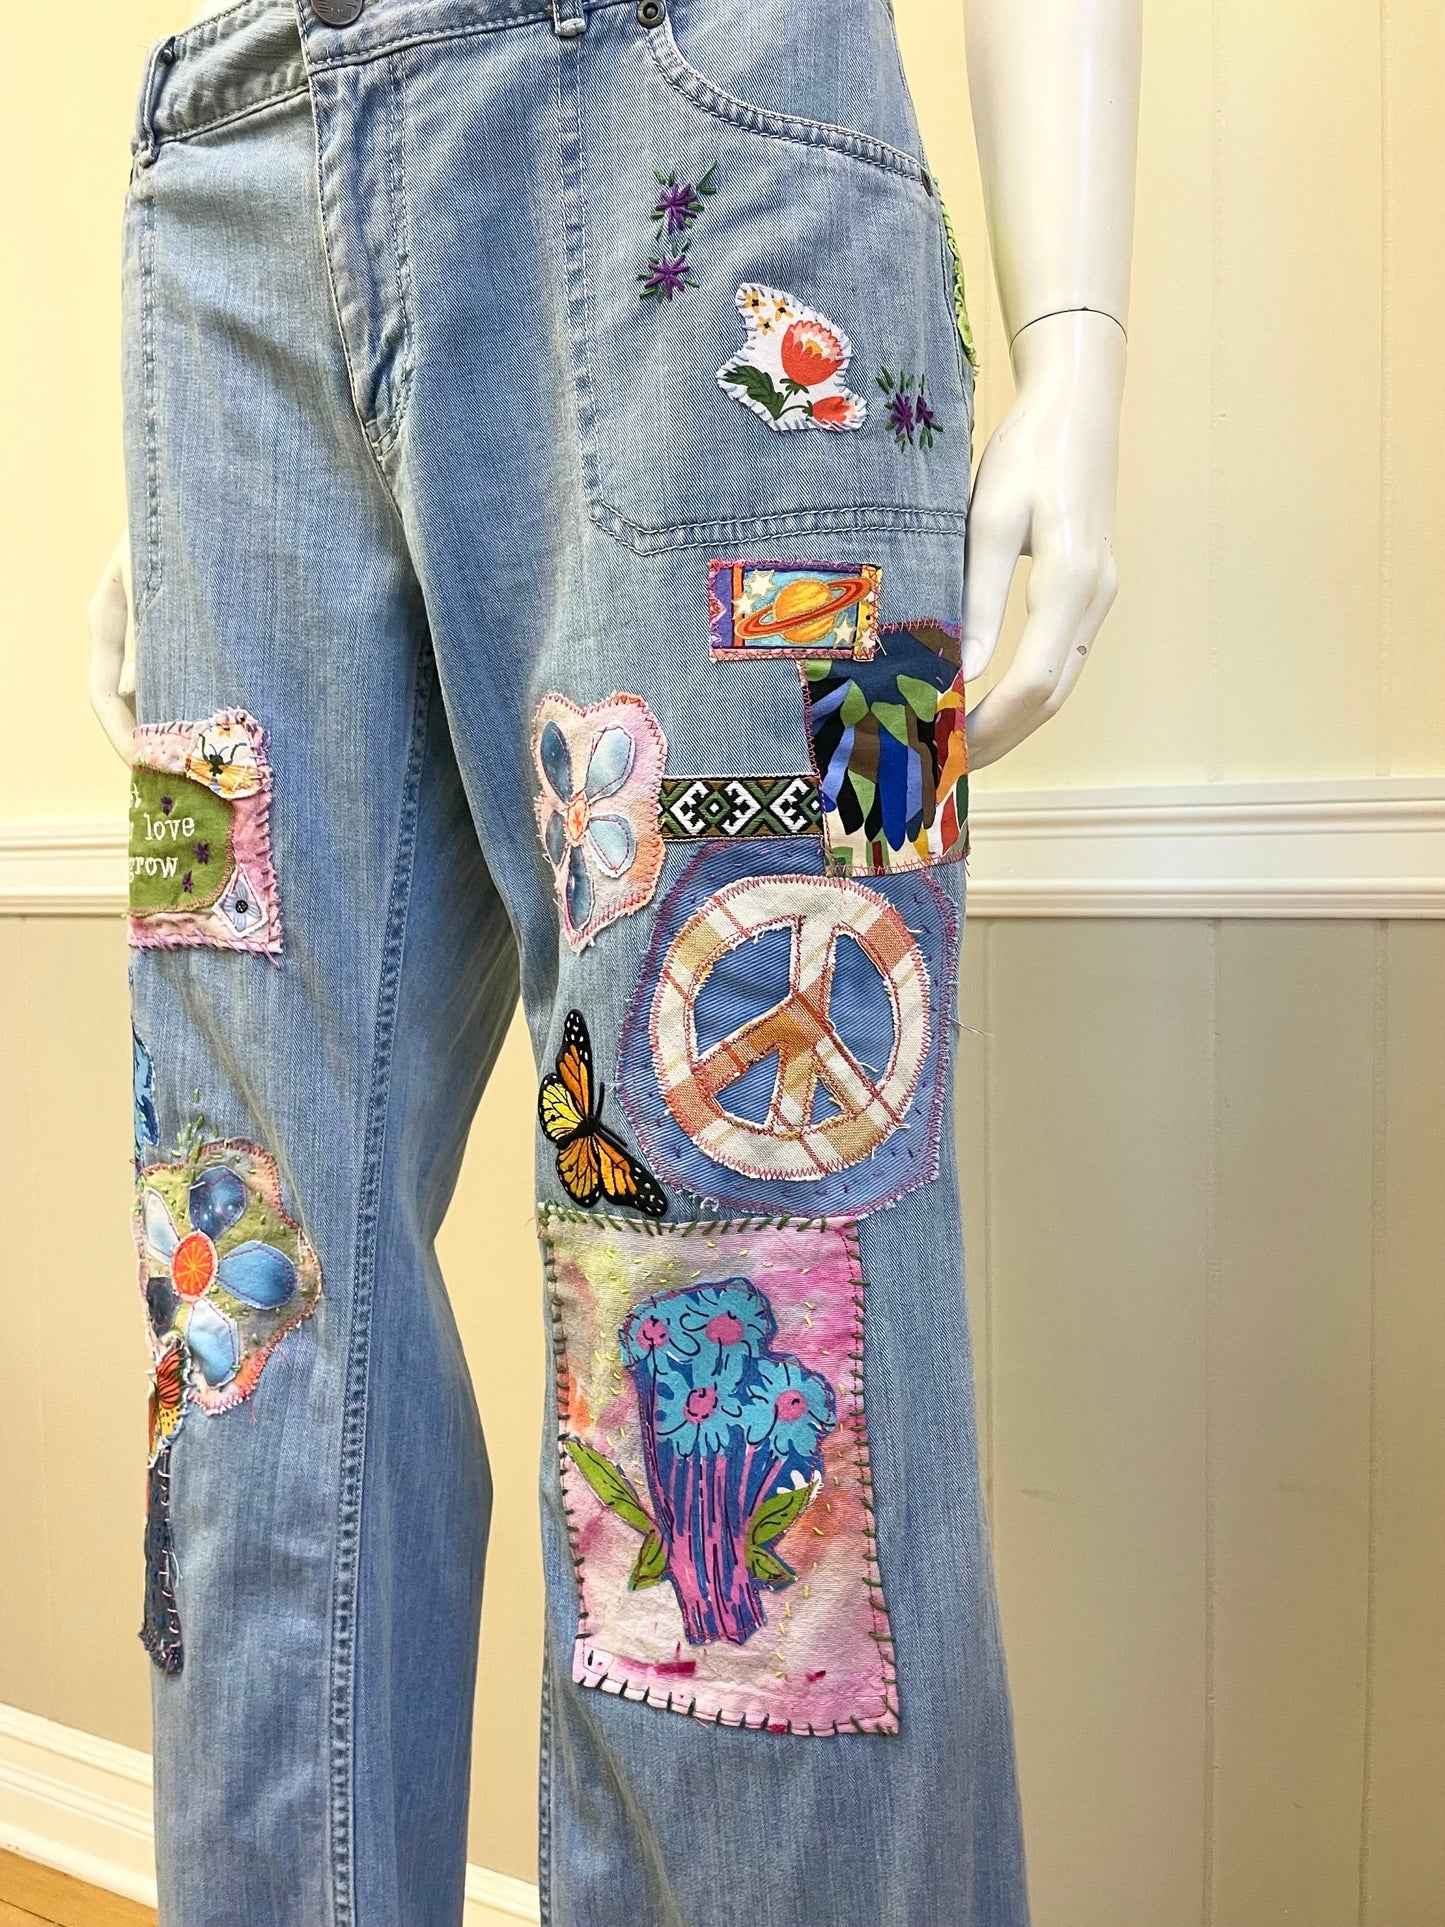 Hippie Patched Jeans - Wide Leg Womens Size 6 - Boho Style Denim Hand-Patched Upcycled Embroidered Appilique - One of a Kind. Size 6. J.Jill